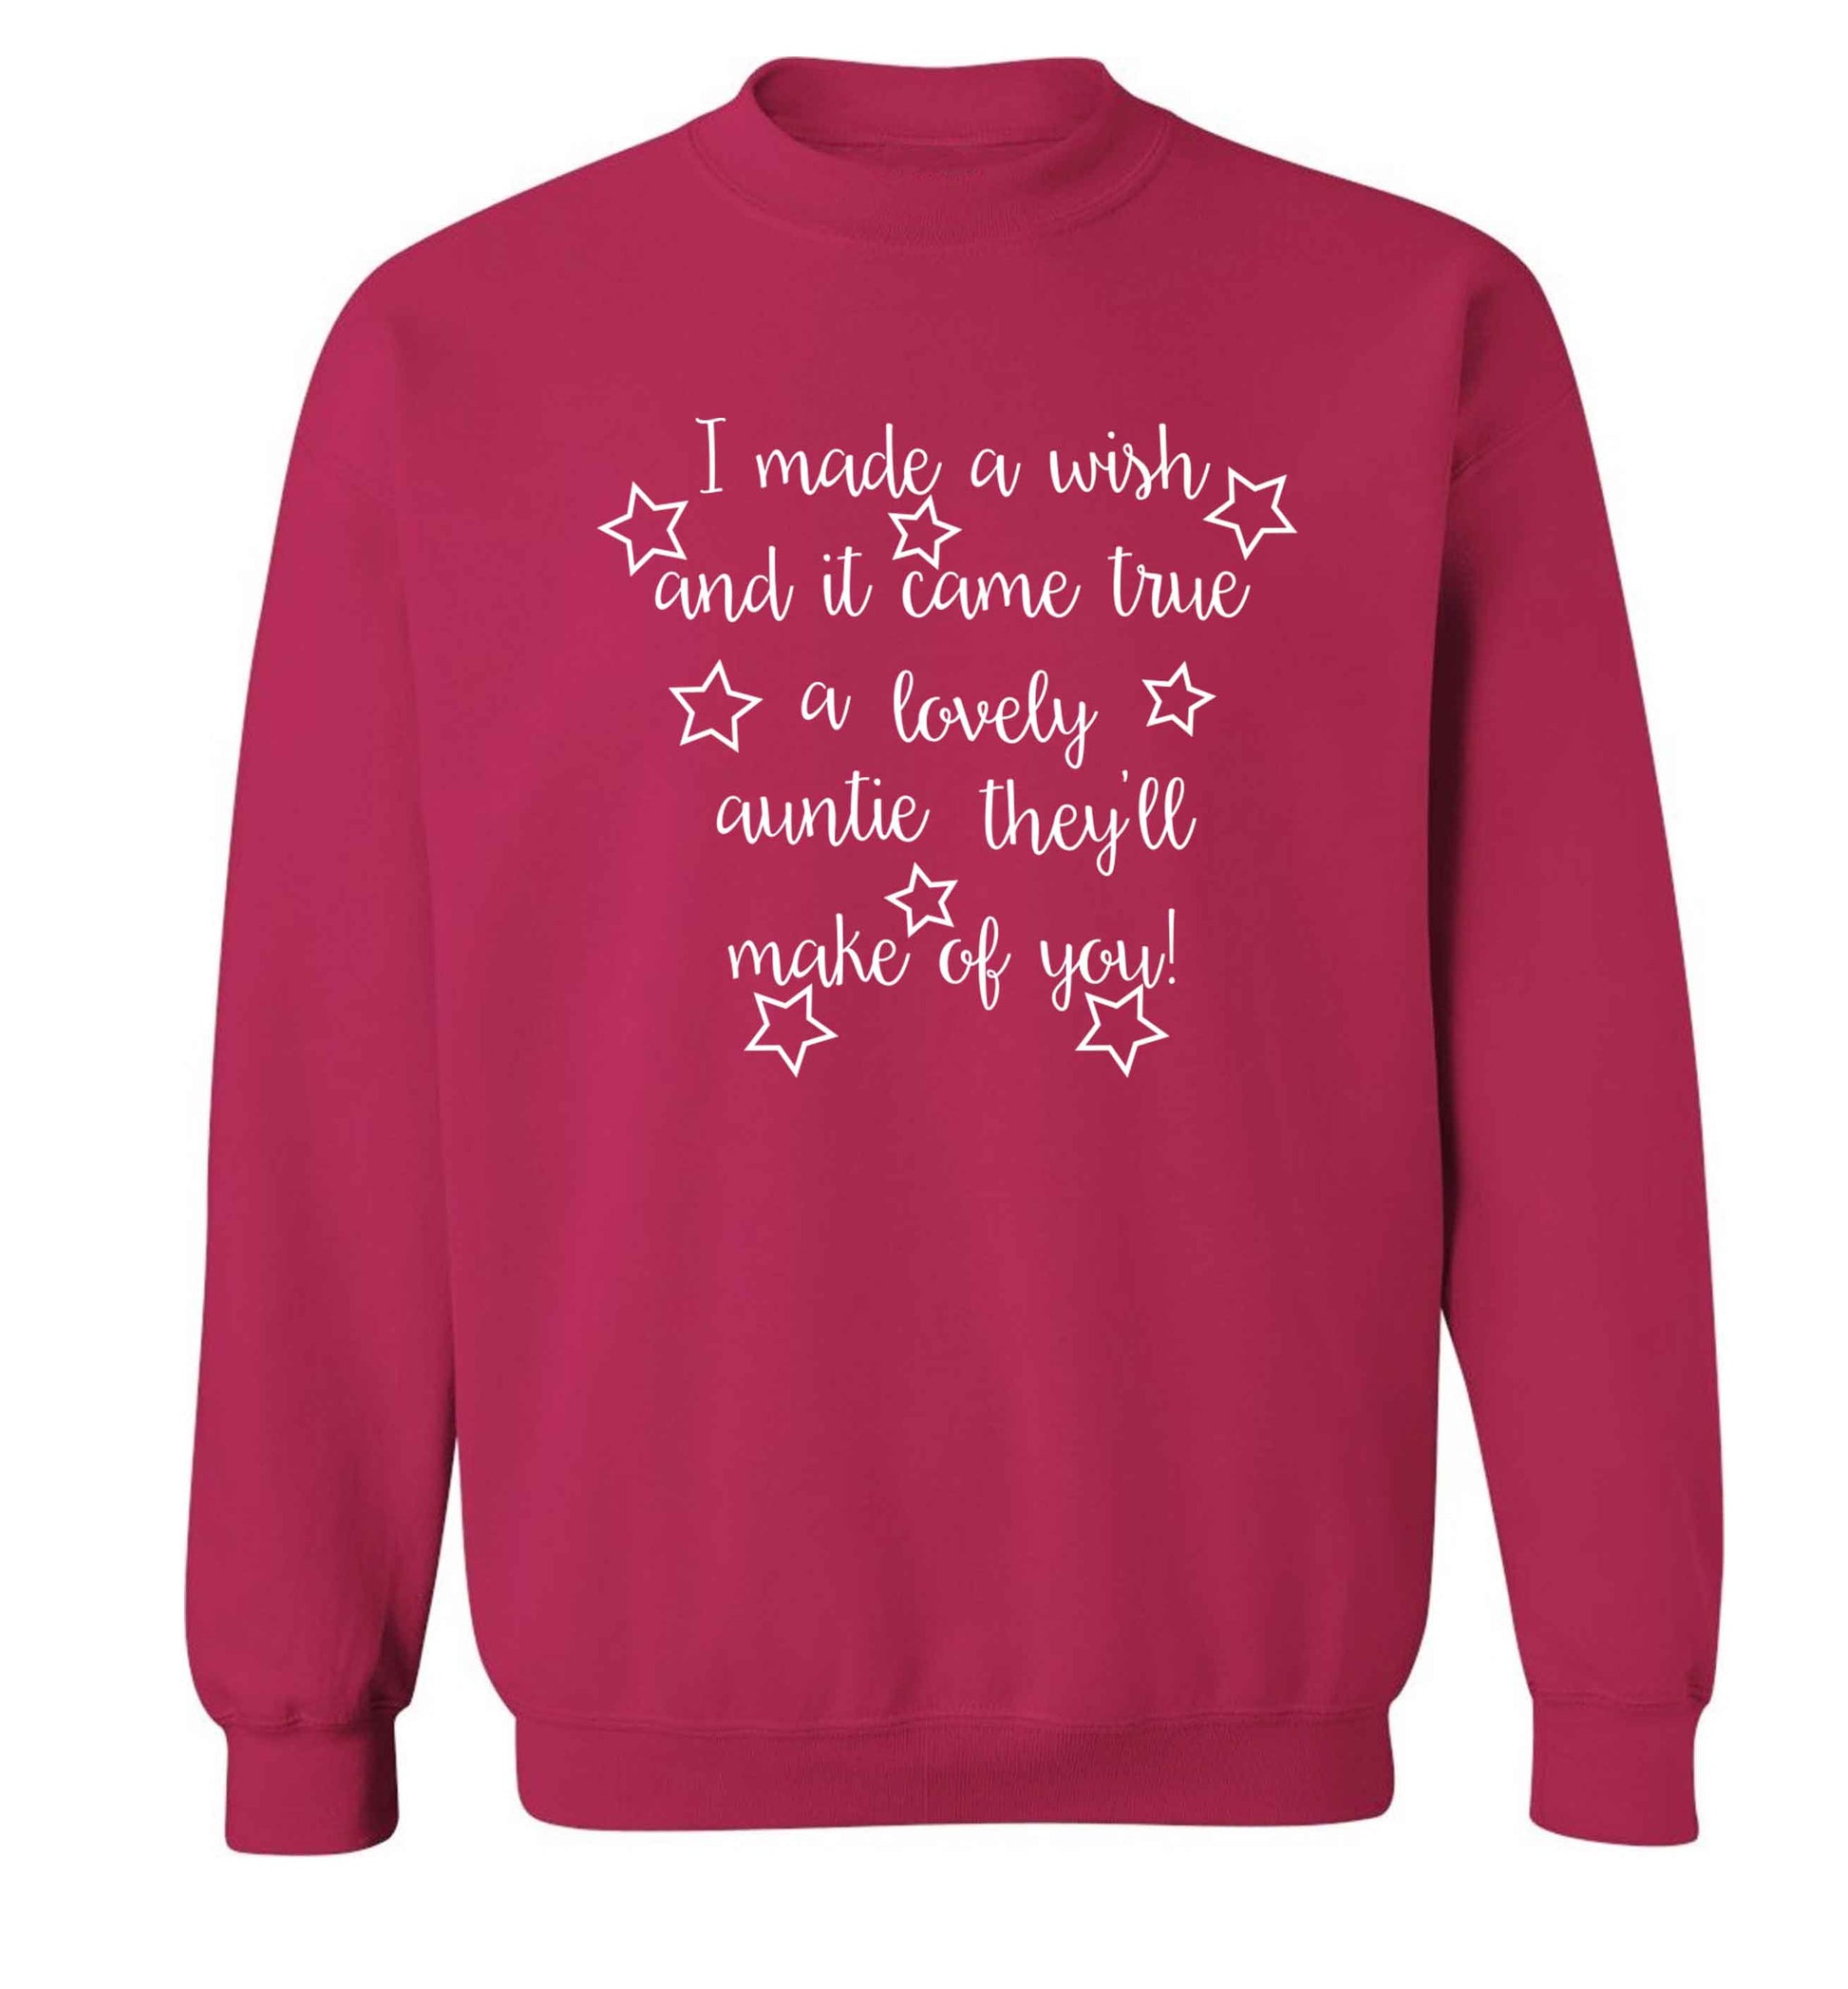 I made a wish and it came true a lovely auntie they'll make of you! Adult's unisex pink Sweater 2XL